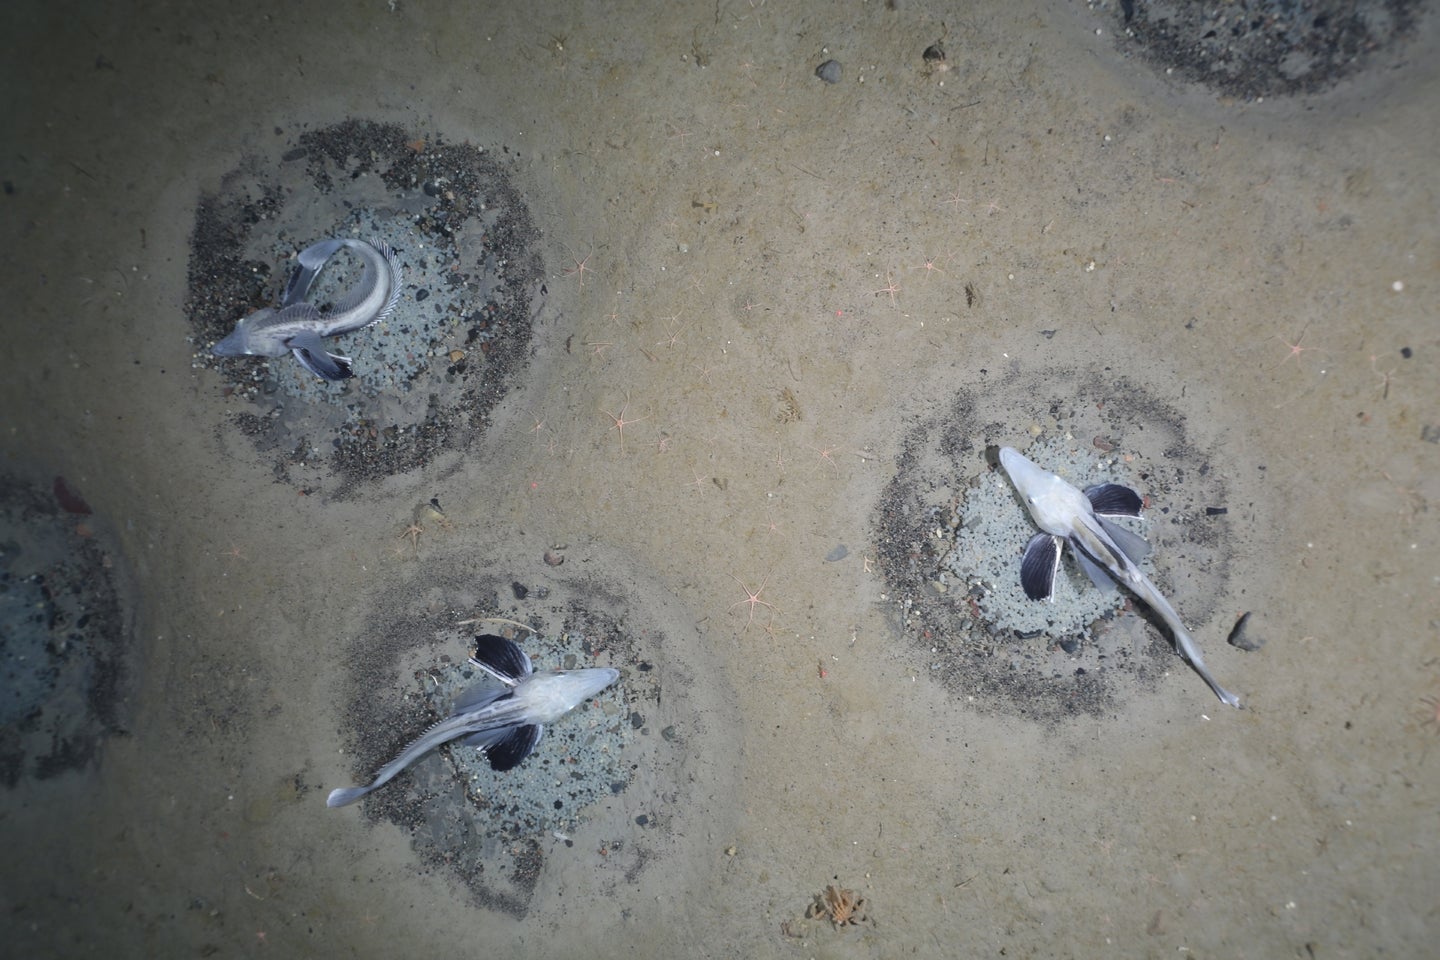 Icefish nests encircled in stones on the ocean floor